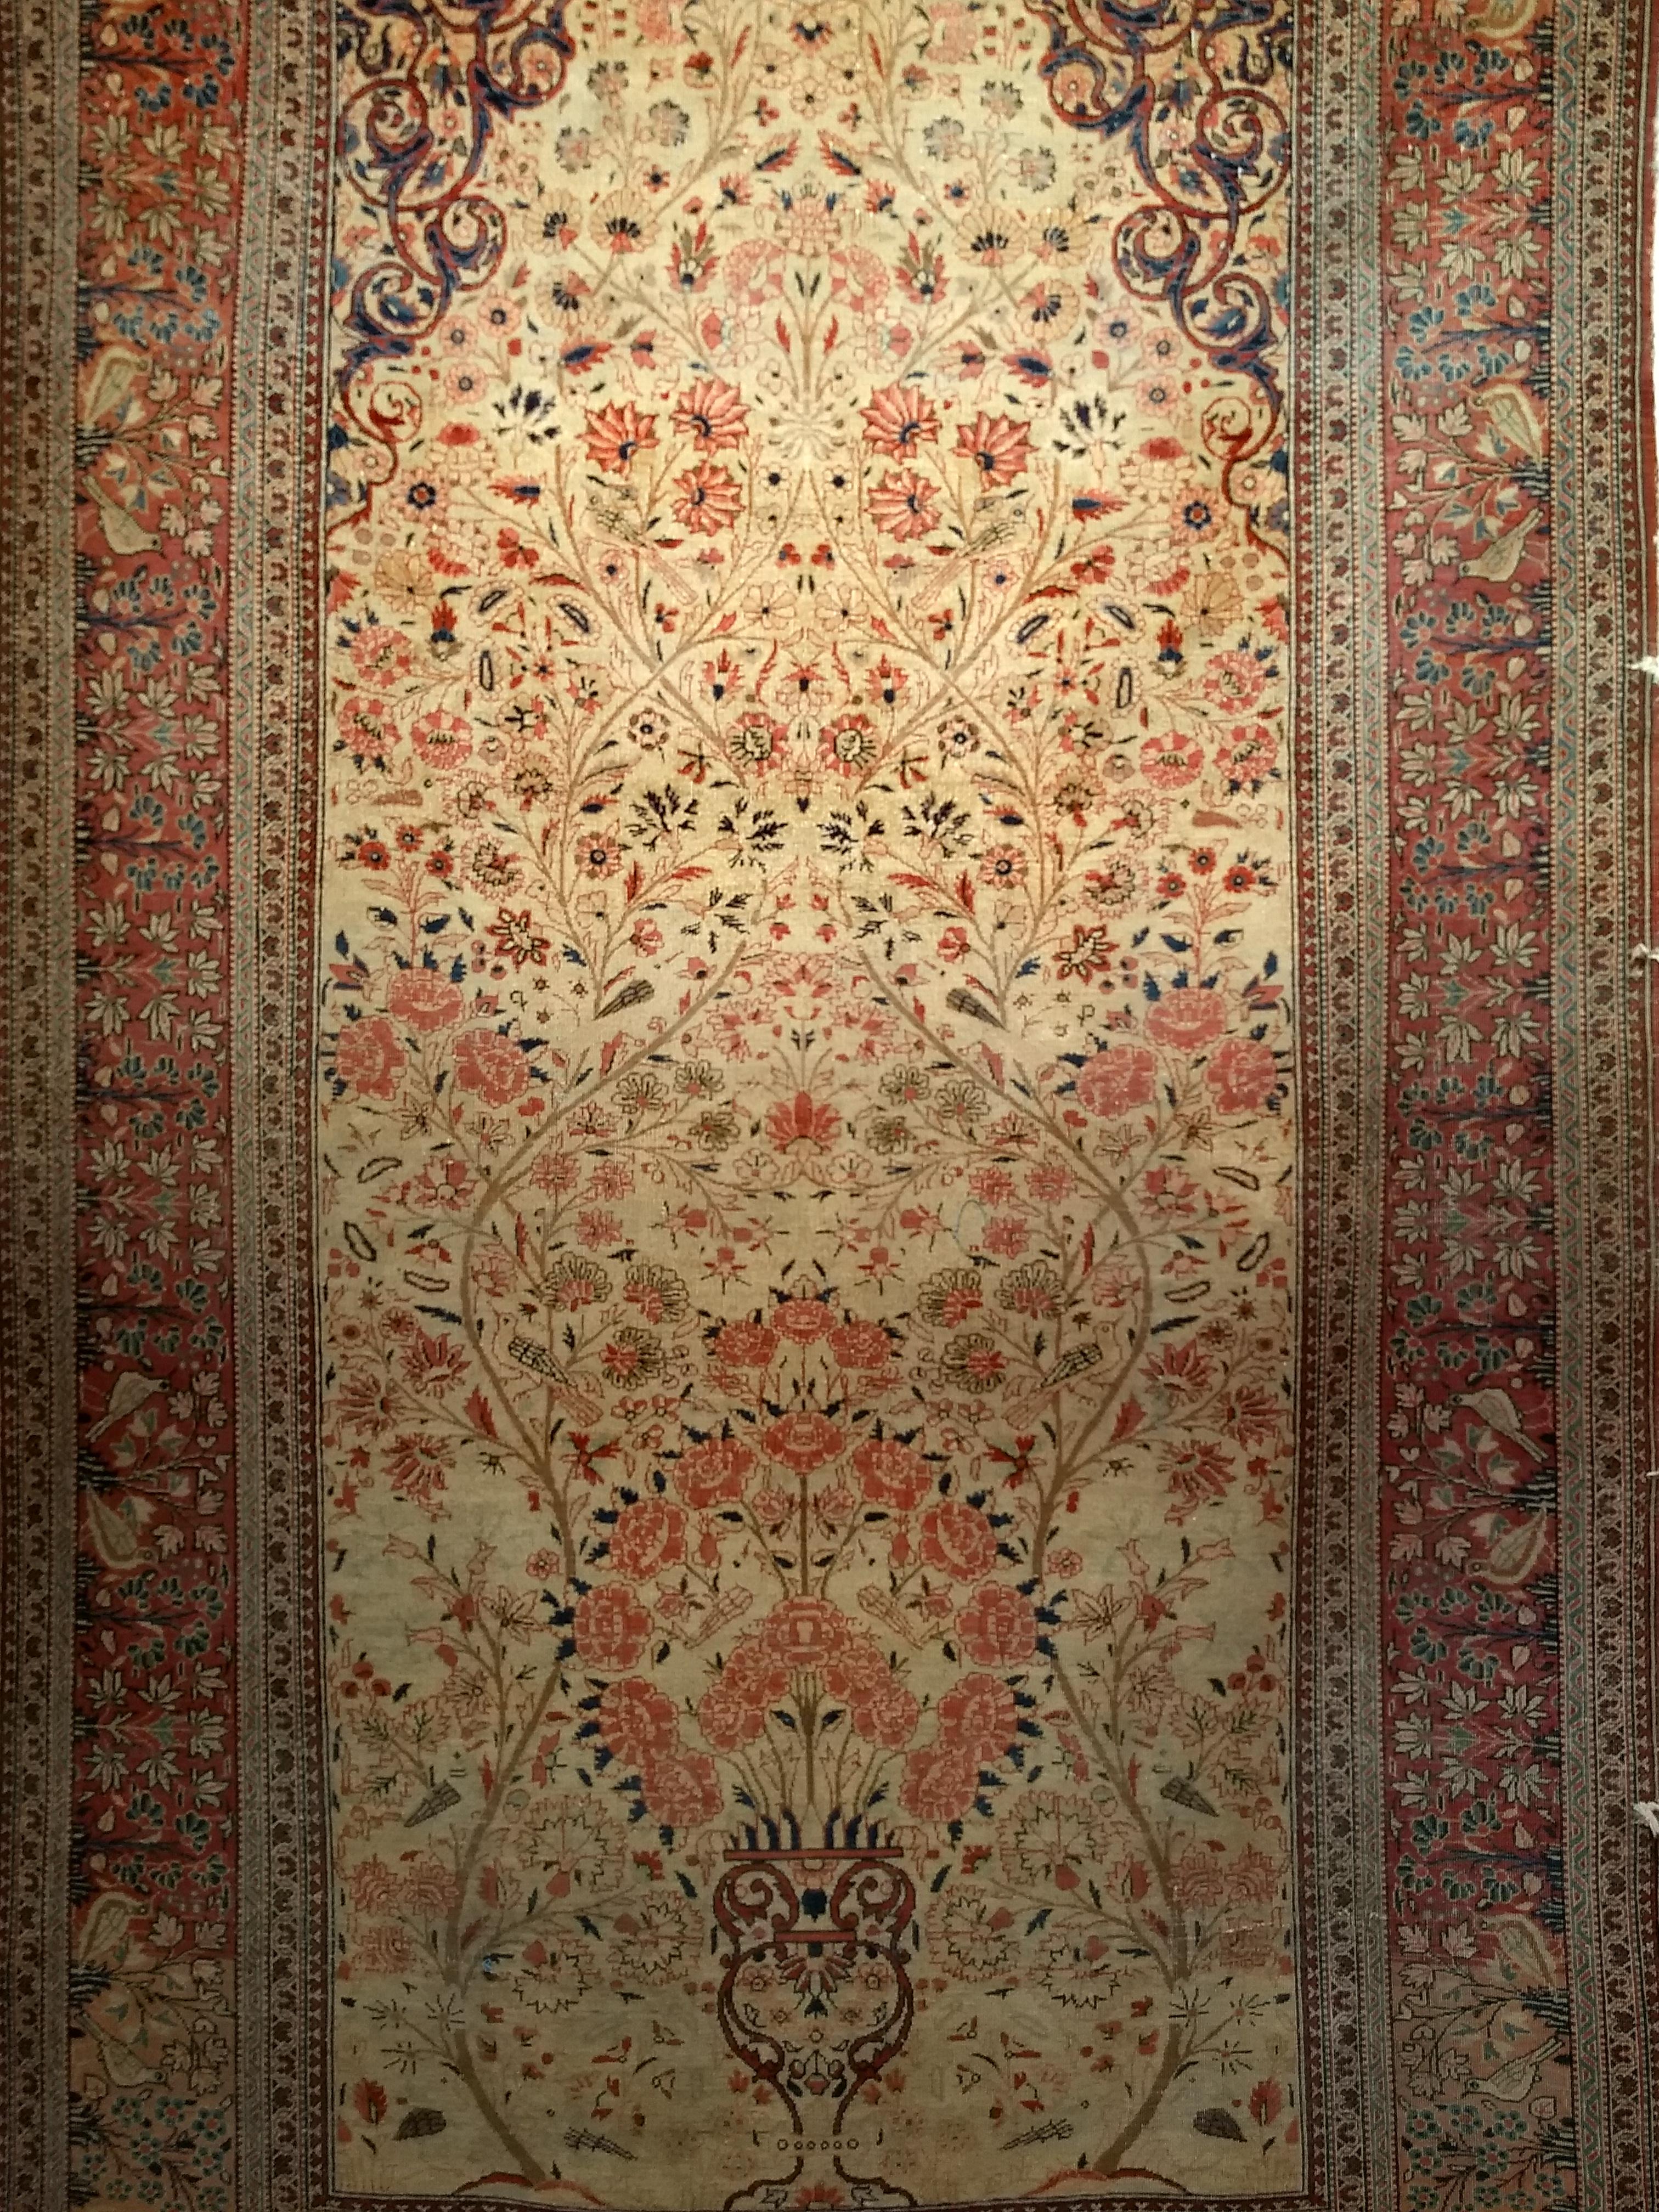 Hand-Woven 19th Century Persian Kashan “Tree of Life” Vase Rug in Ivory, Brick Red, Navy For Sale